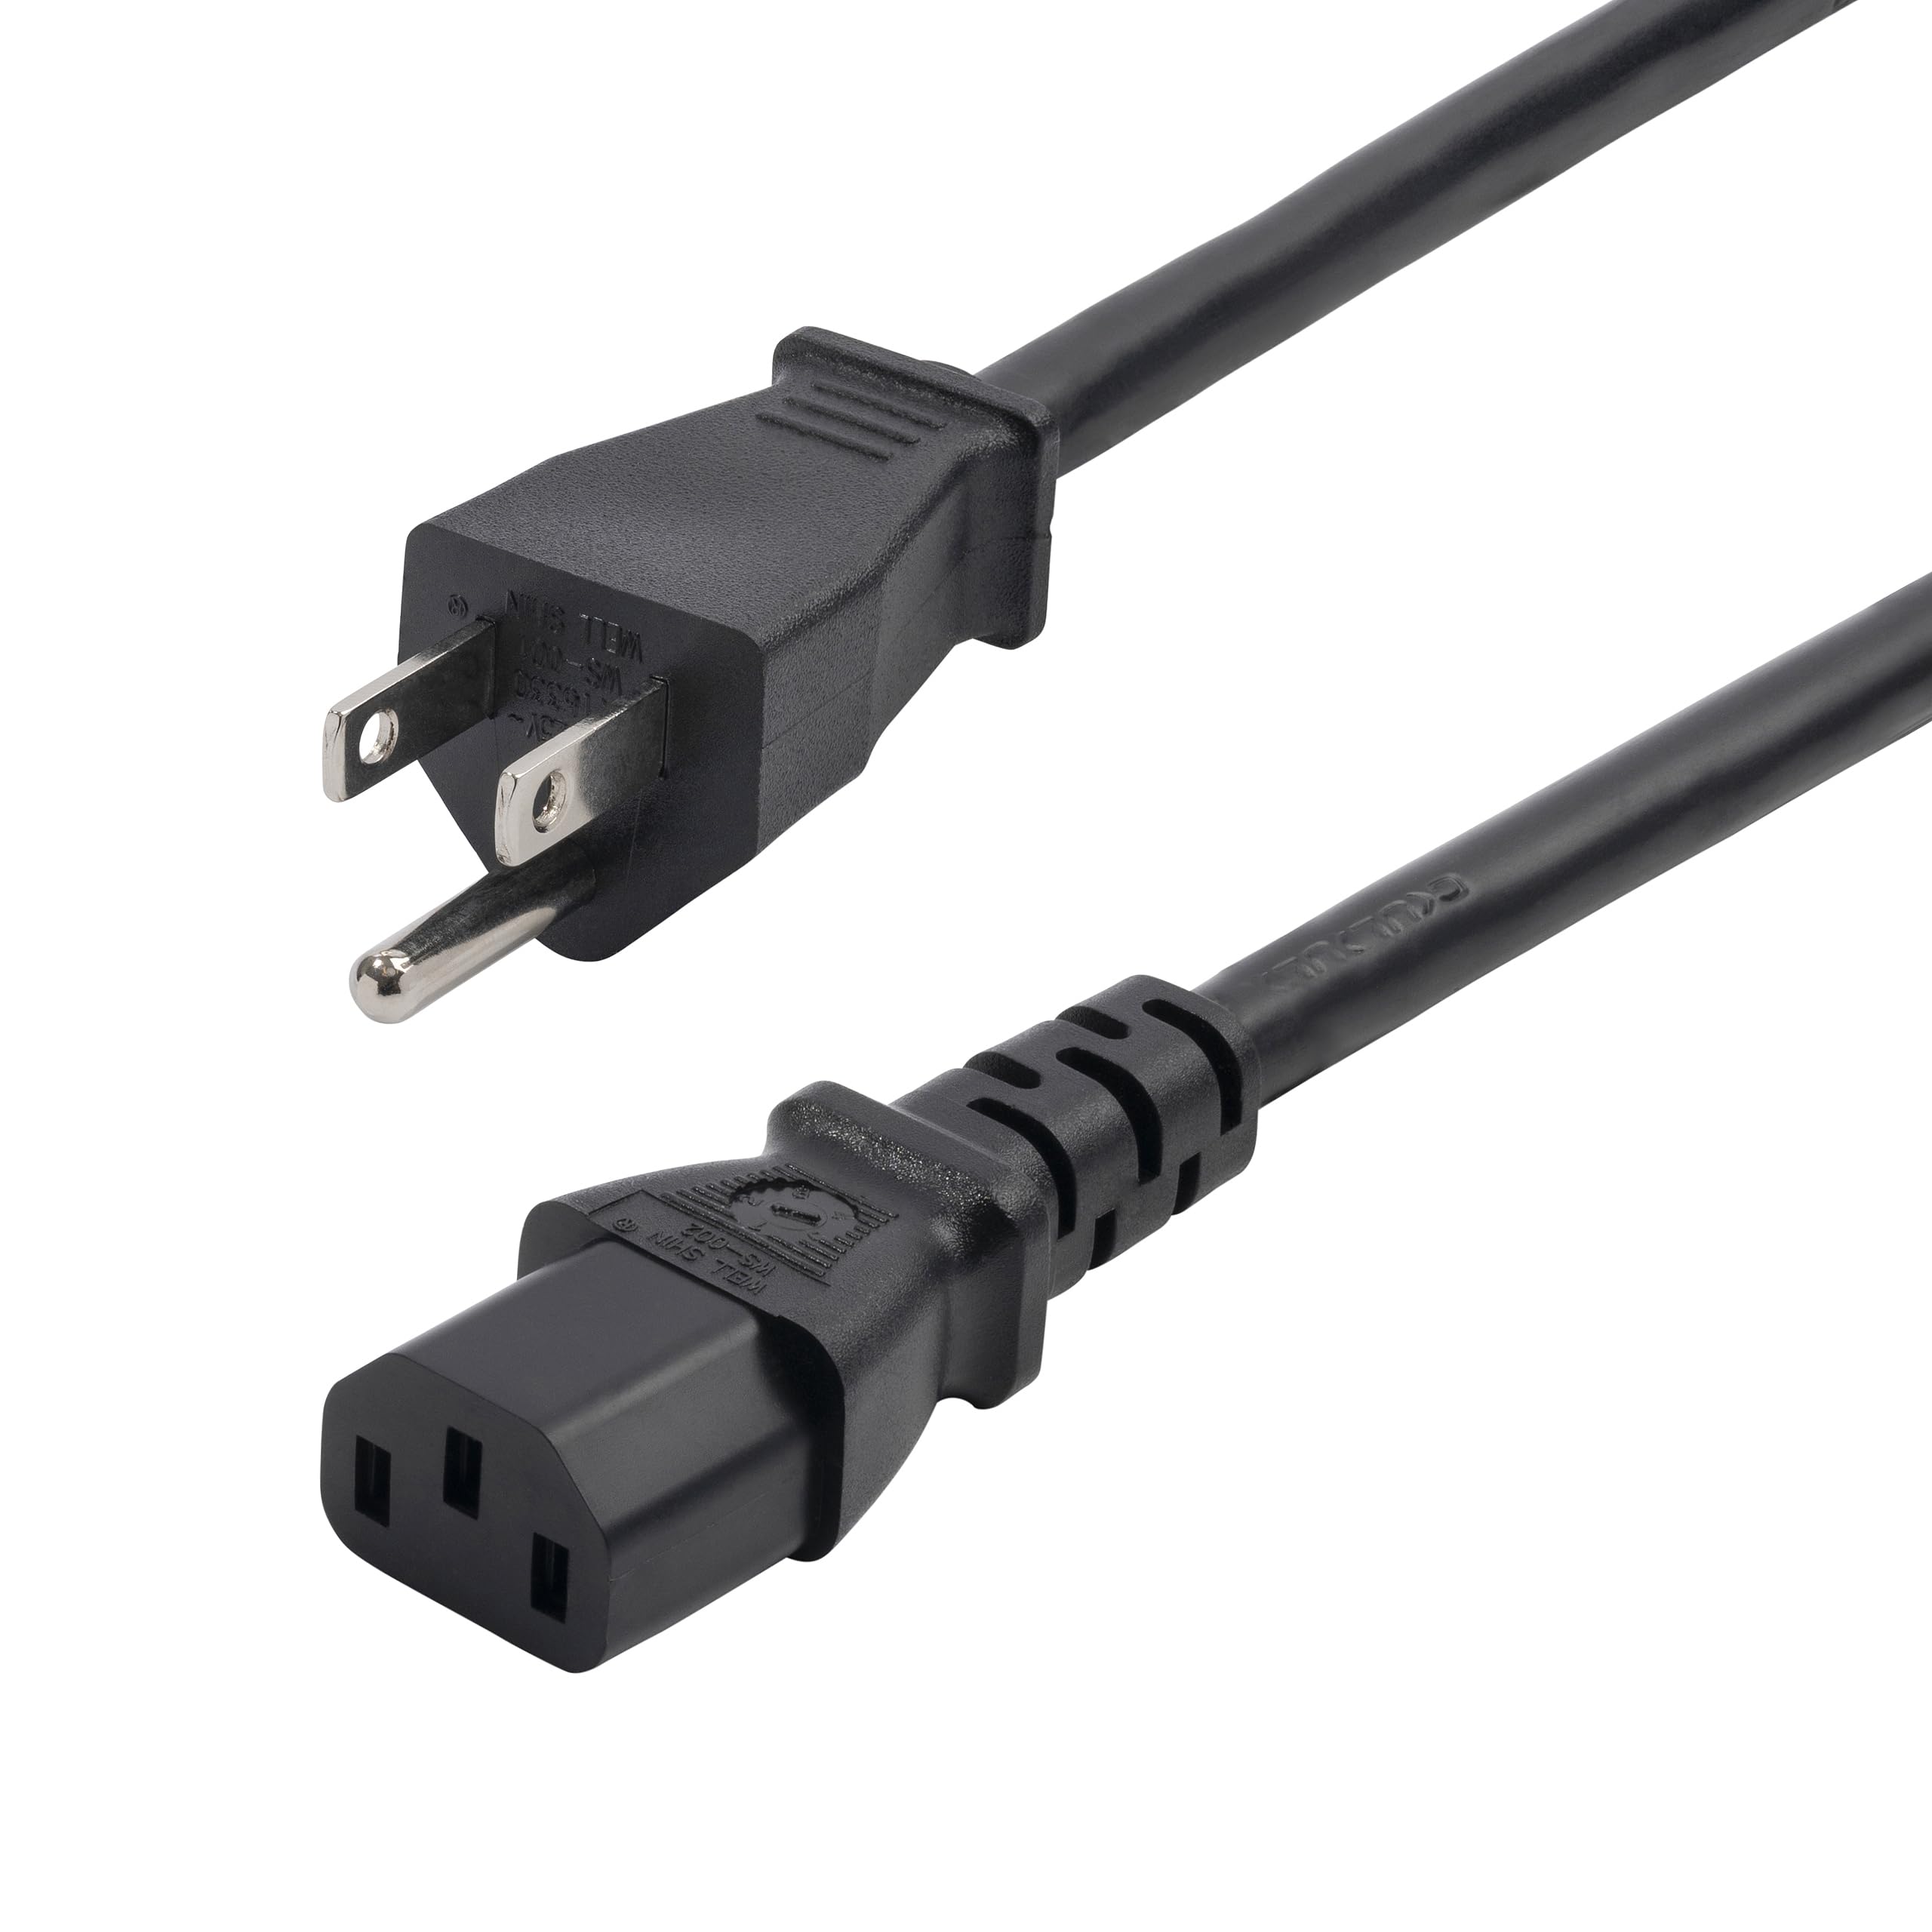 StarTech.com 8ft (2.4m) Computer Power Cord, NEMA 5-15P to IEC 60320 C13 AC Power Cable, 13A 125V, 16AWG, Replacement Power Cable, Monitor Power Cable - UL Listed Components (271B-6800-POWER-CORD)